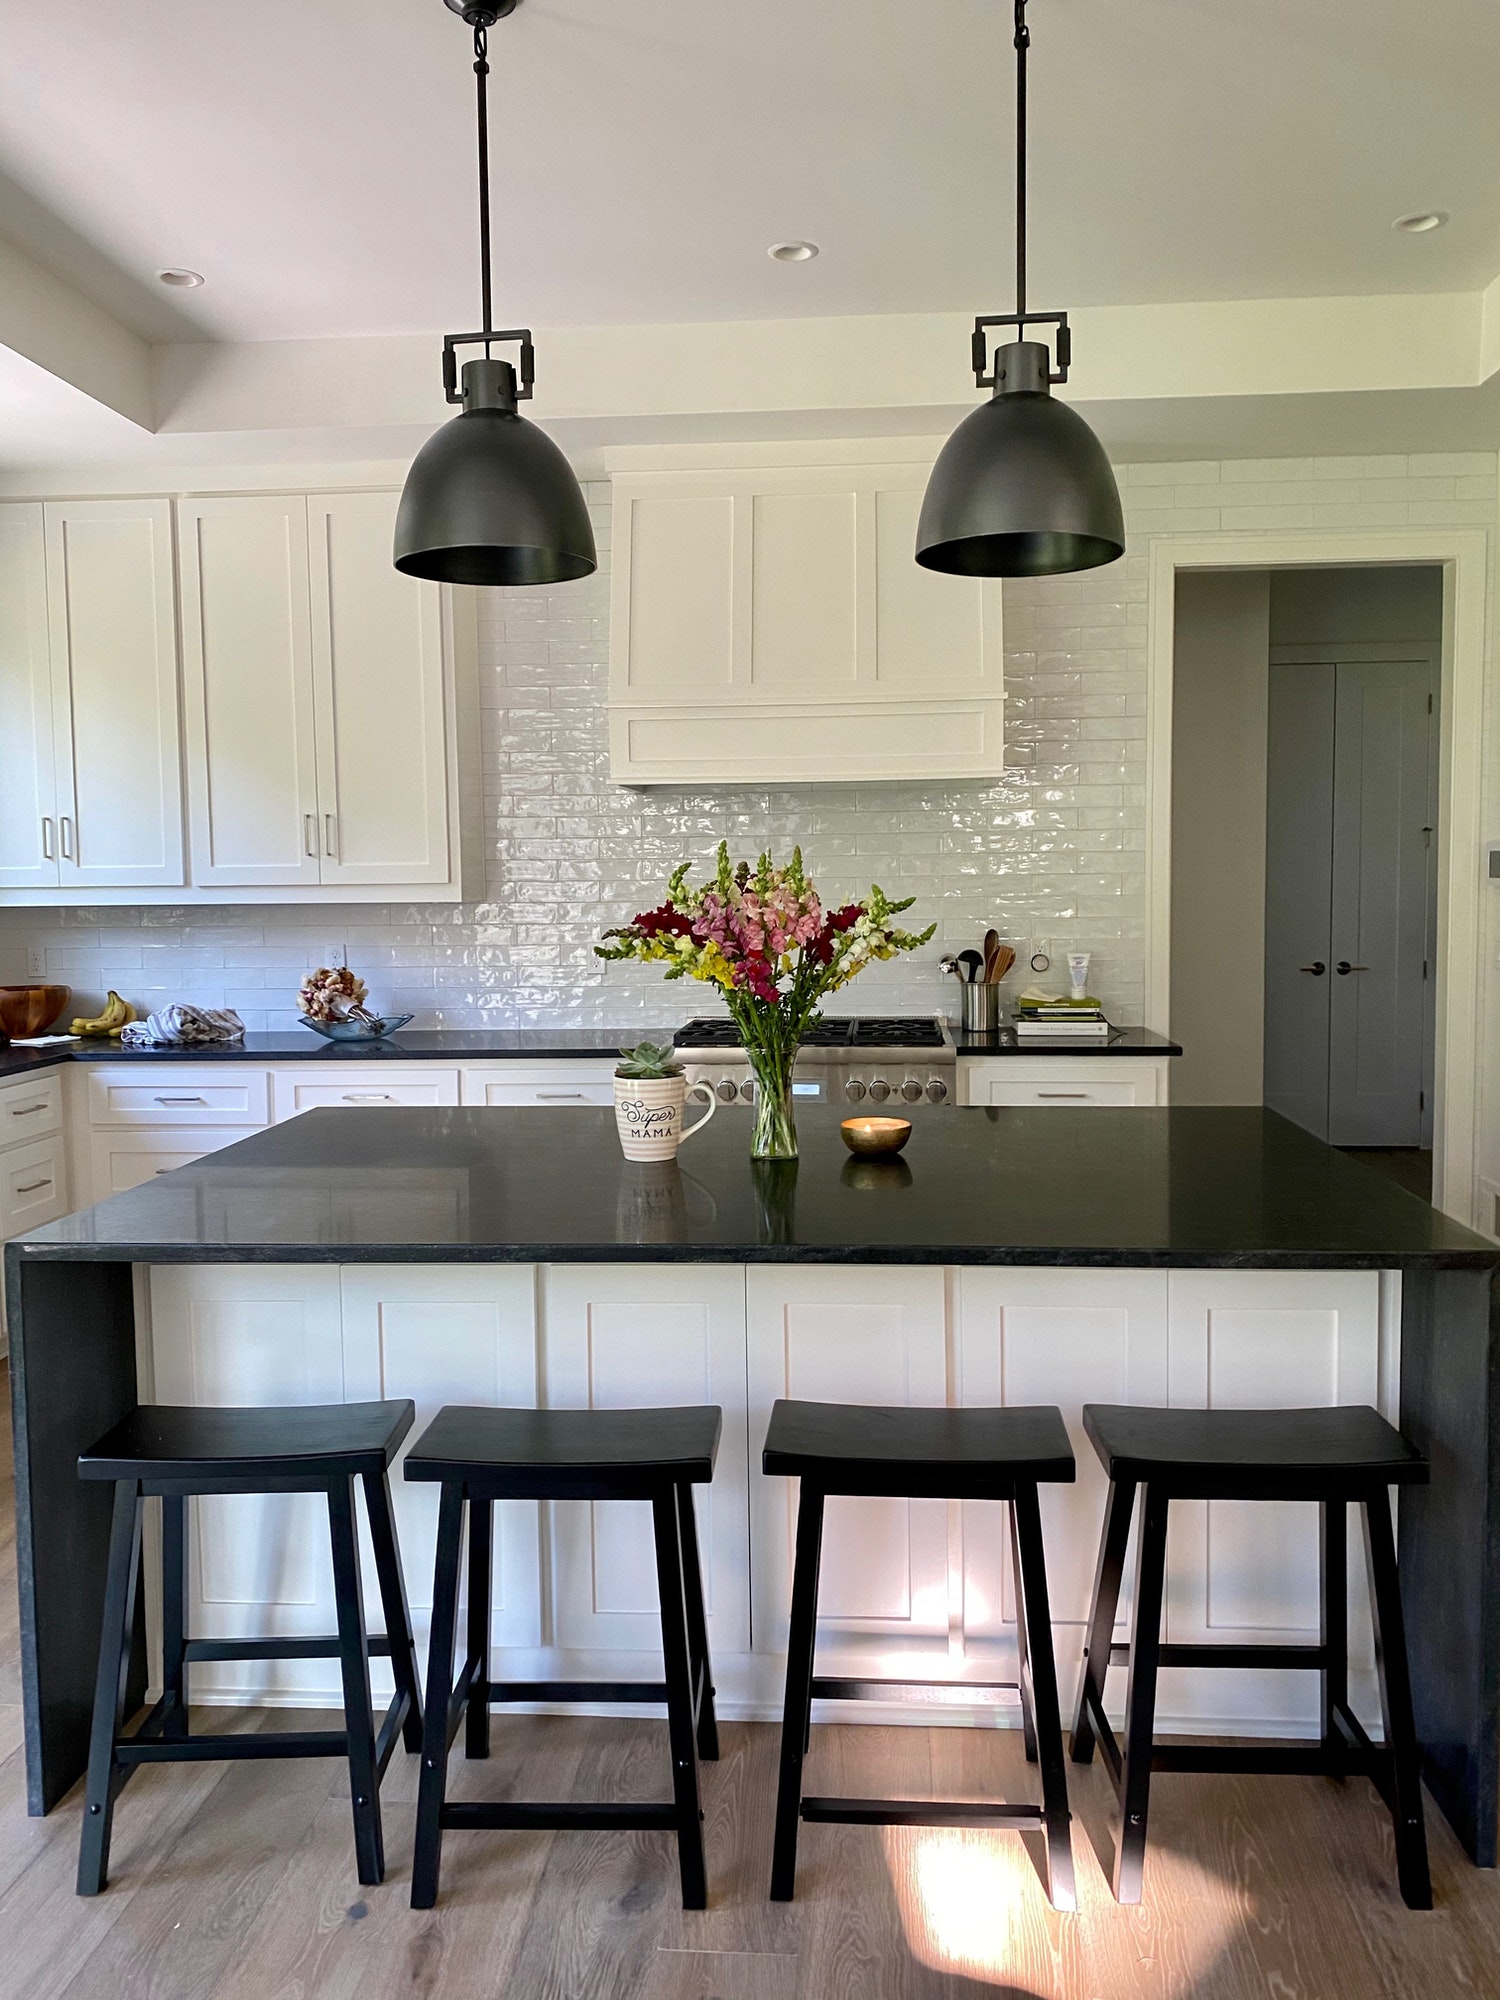 A clean farmhouse style kitchen and island with two metal pendant lights.